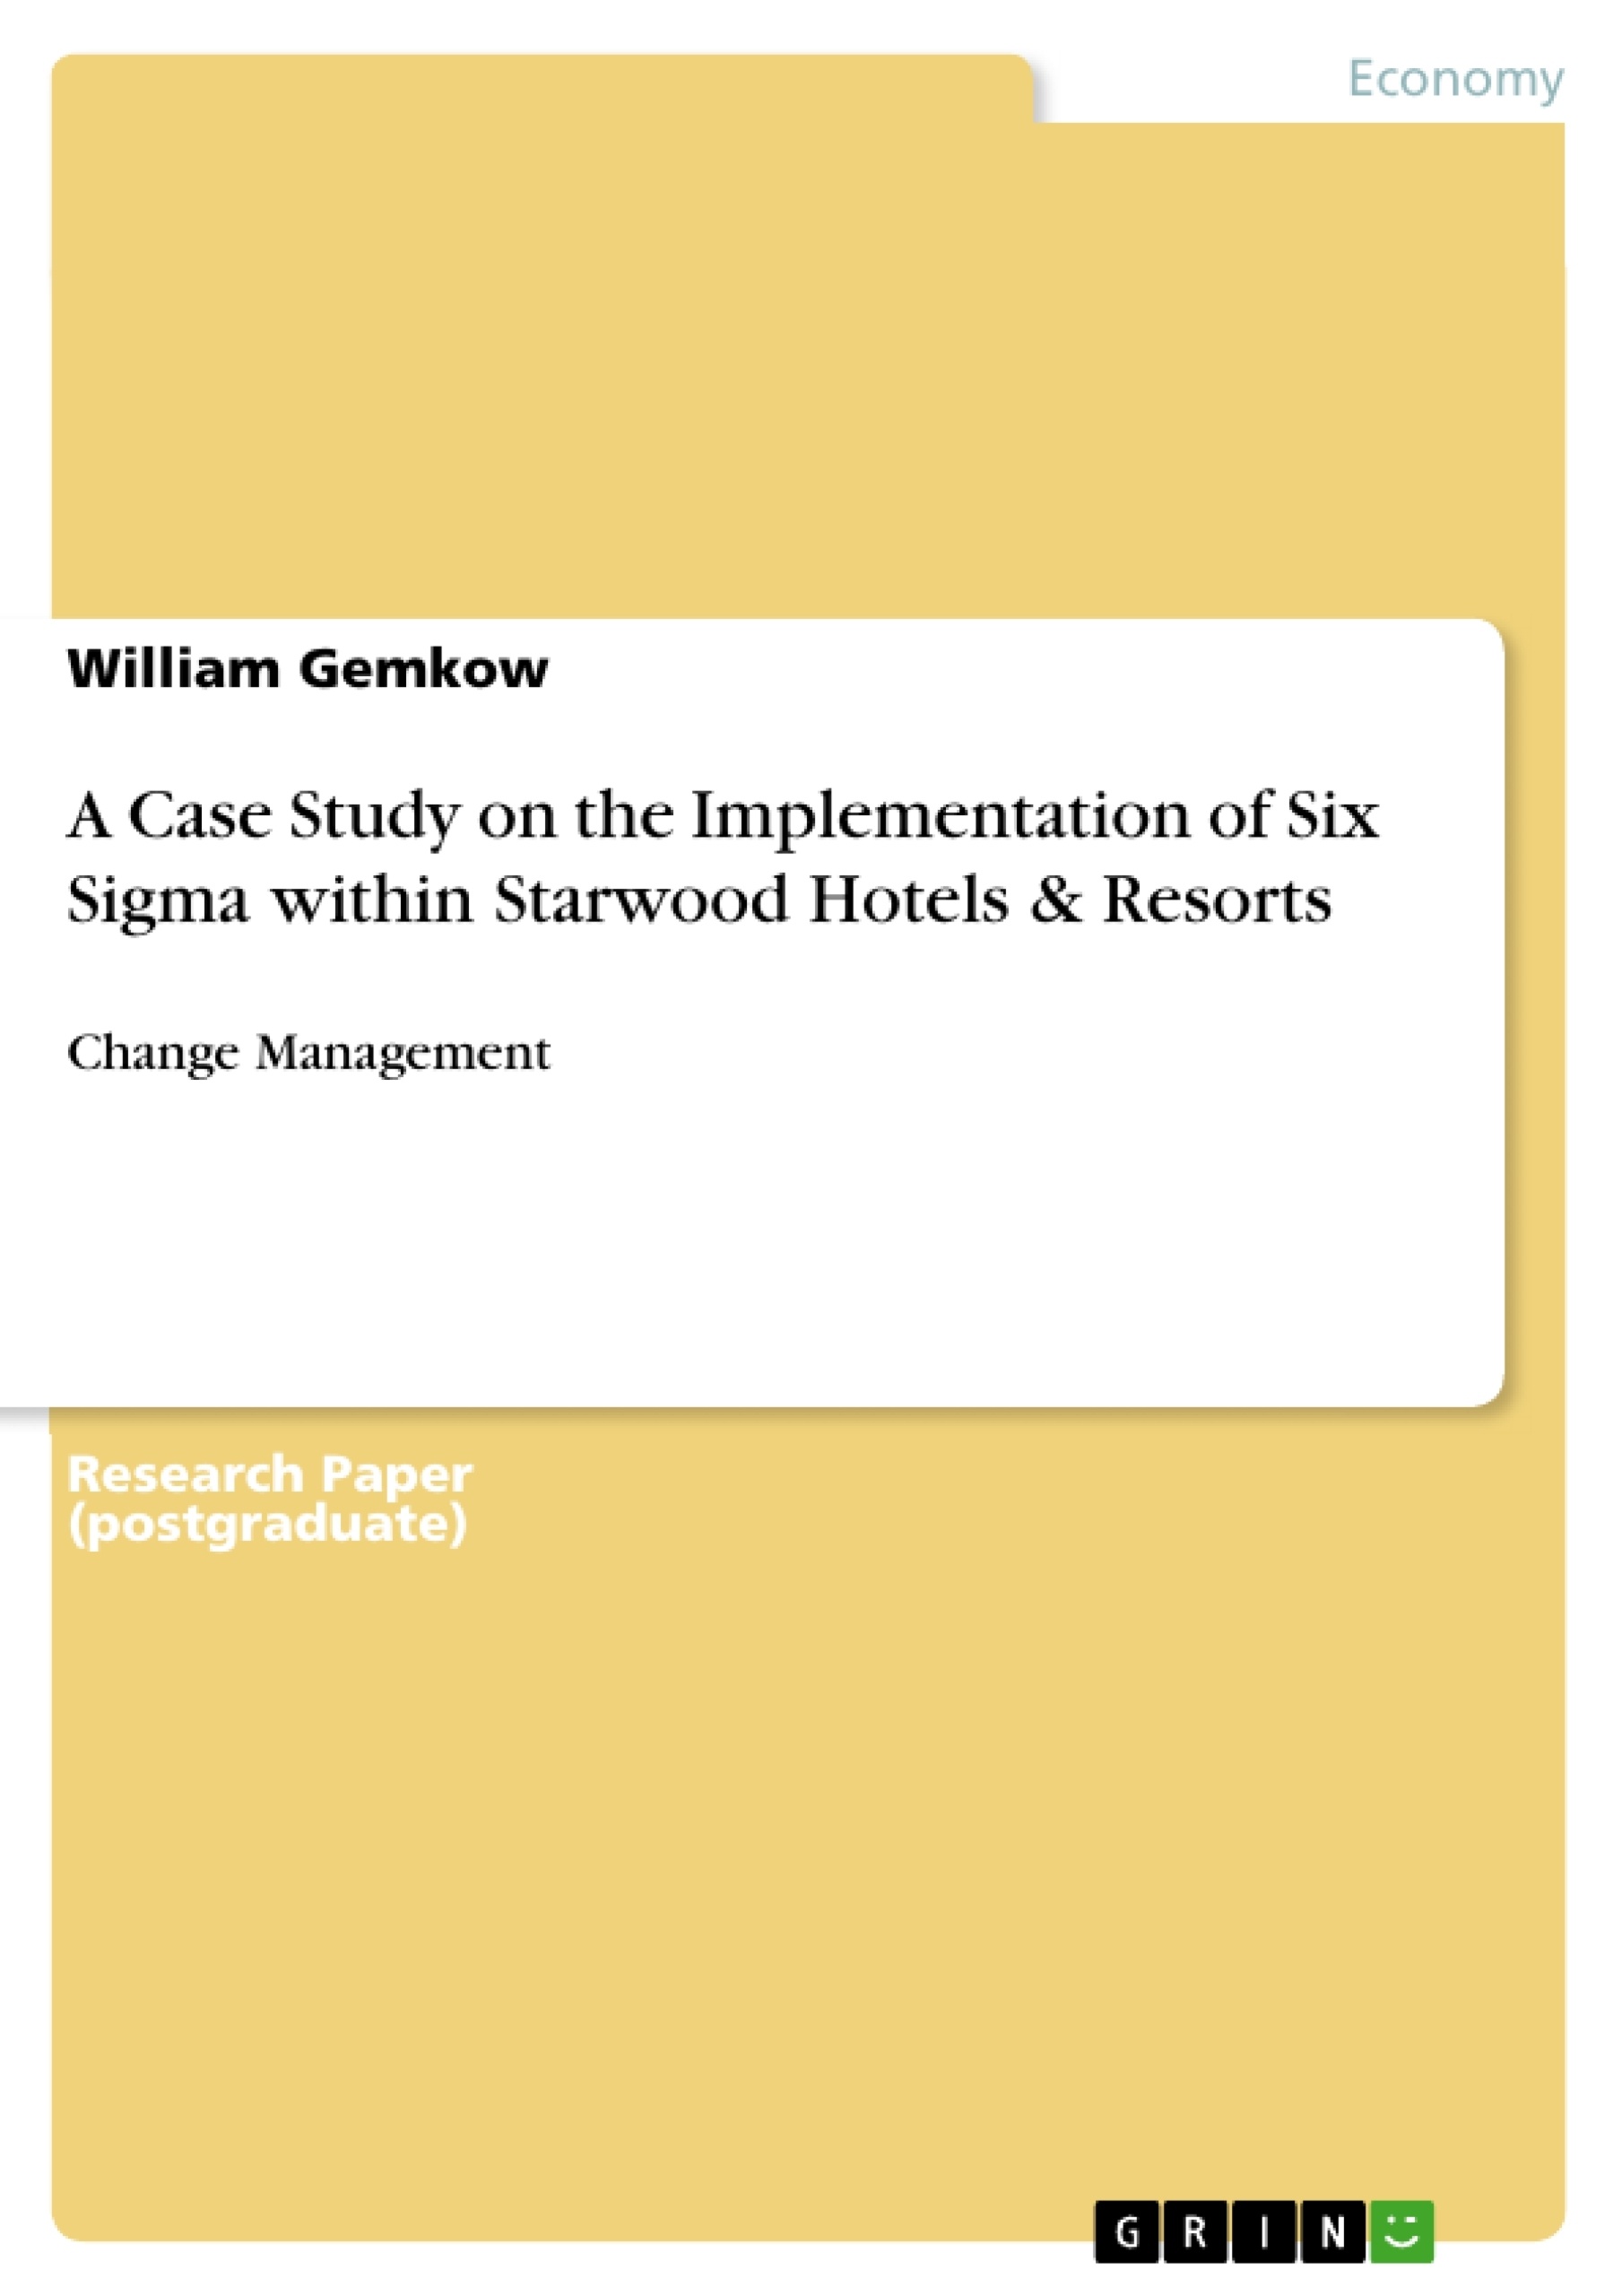 Title: A Case Study on the Implementation of Six Sigma within Starwood Hotels & Resorts